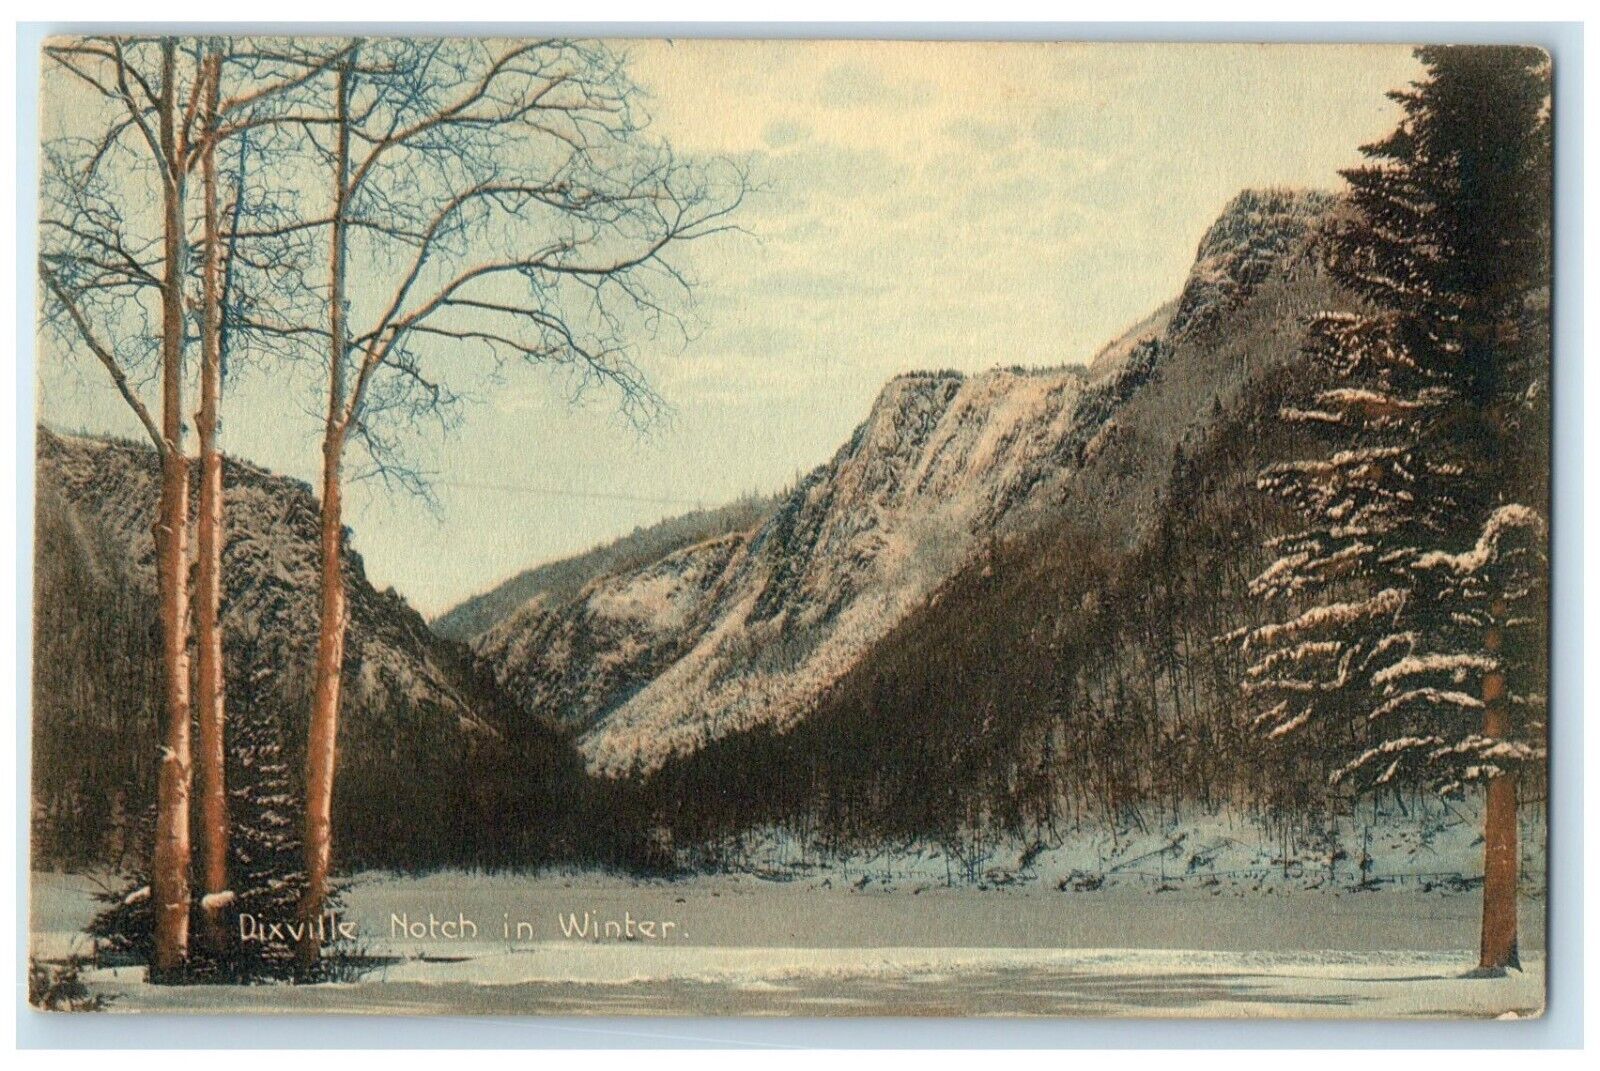 1910 Scenic View Dixville Notch Winter Colebrook New Hampshire Unposted Postcard